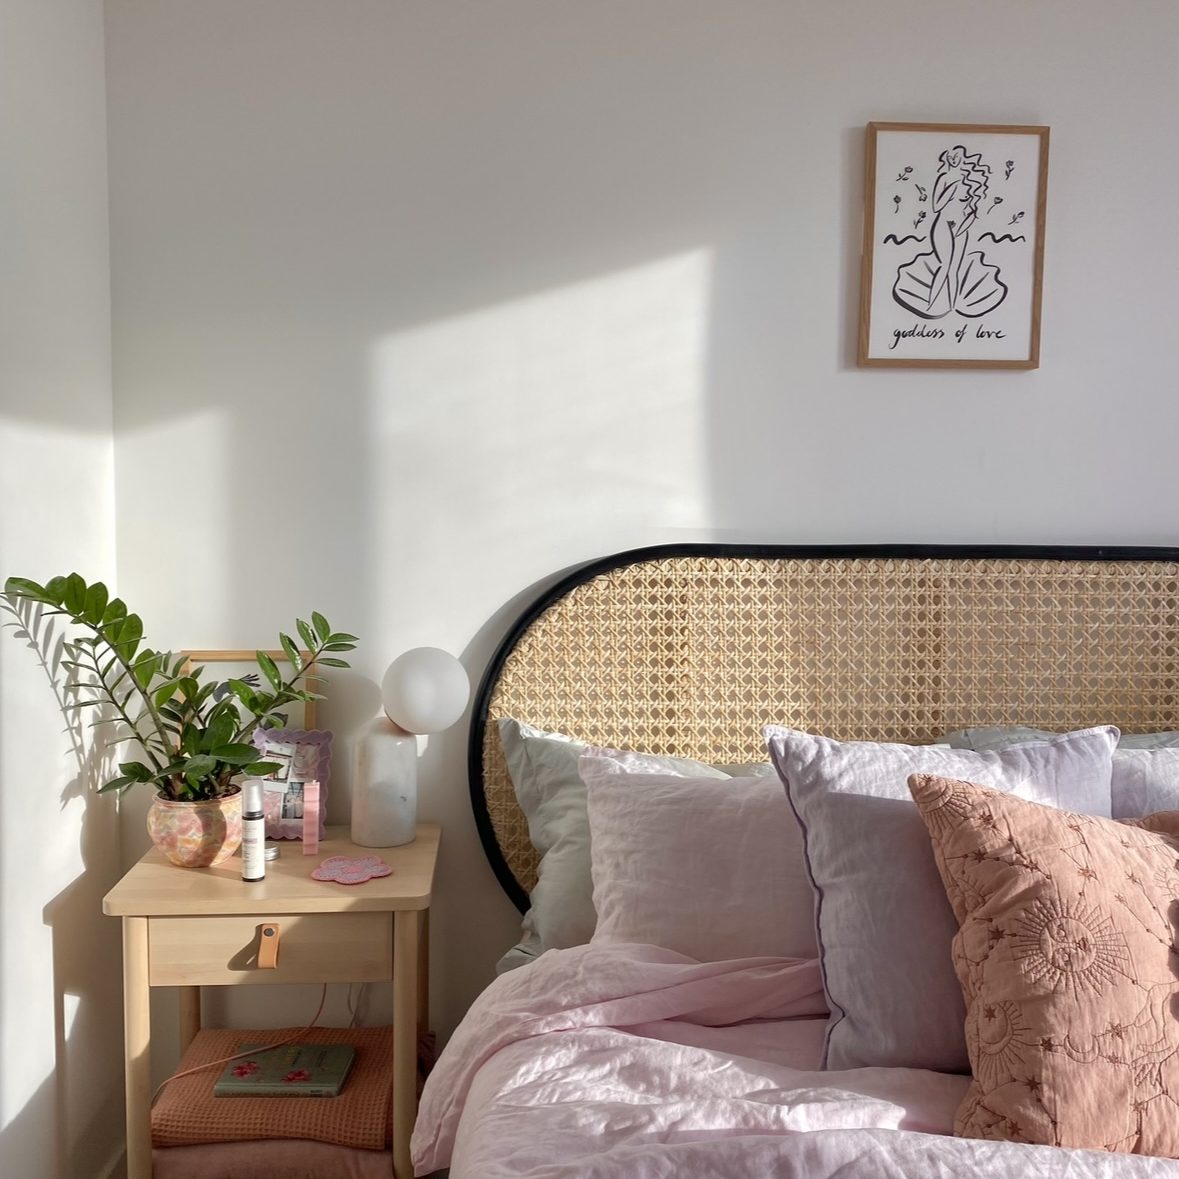 Small bedroom that features a freestanding headboard made from cane rattan.